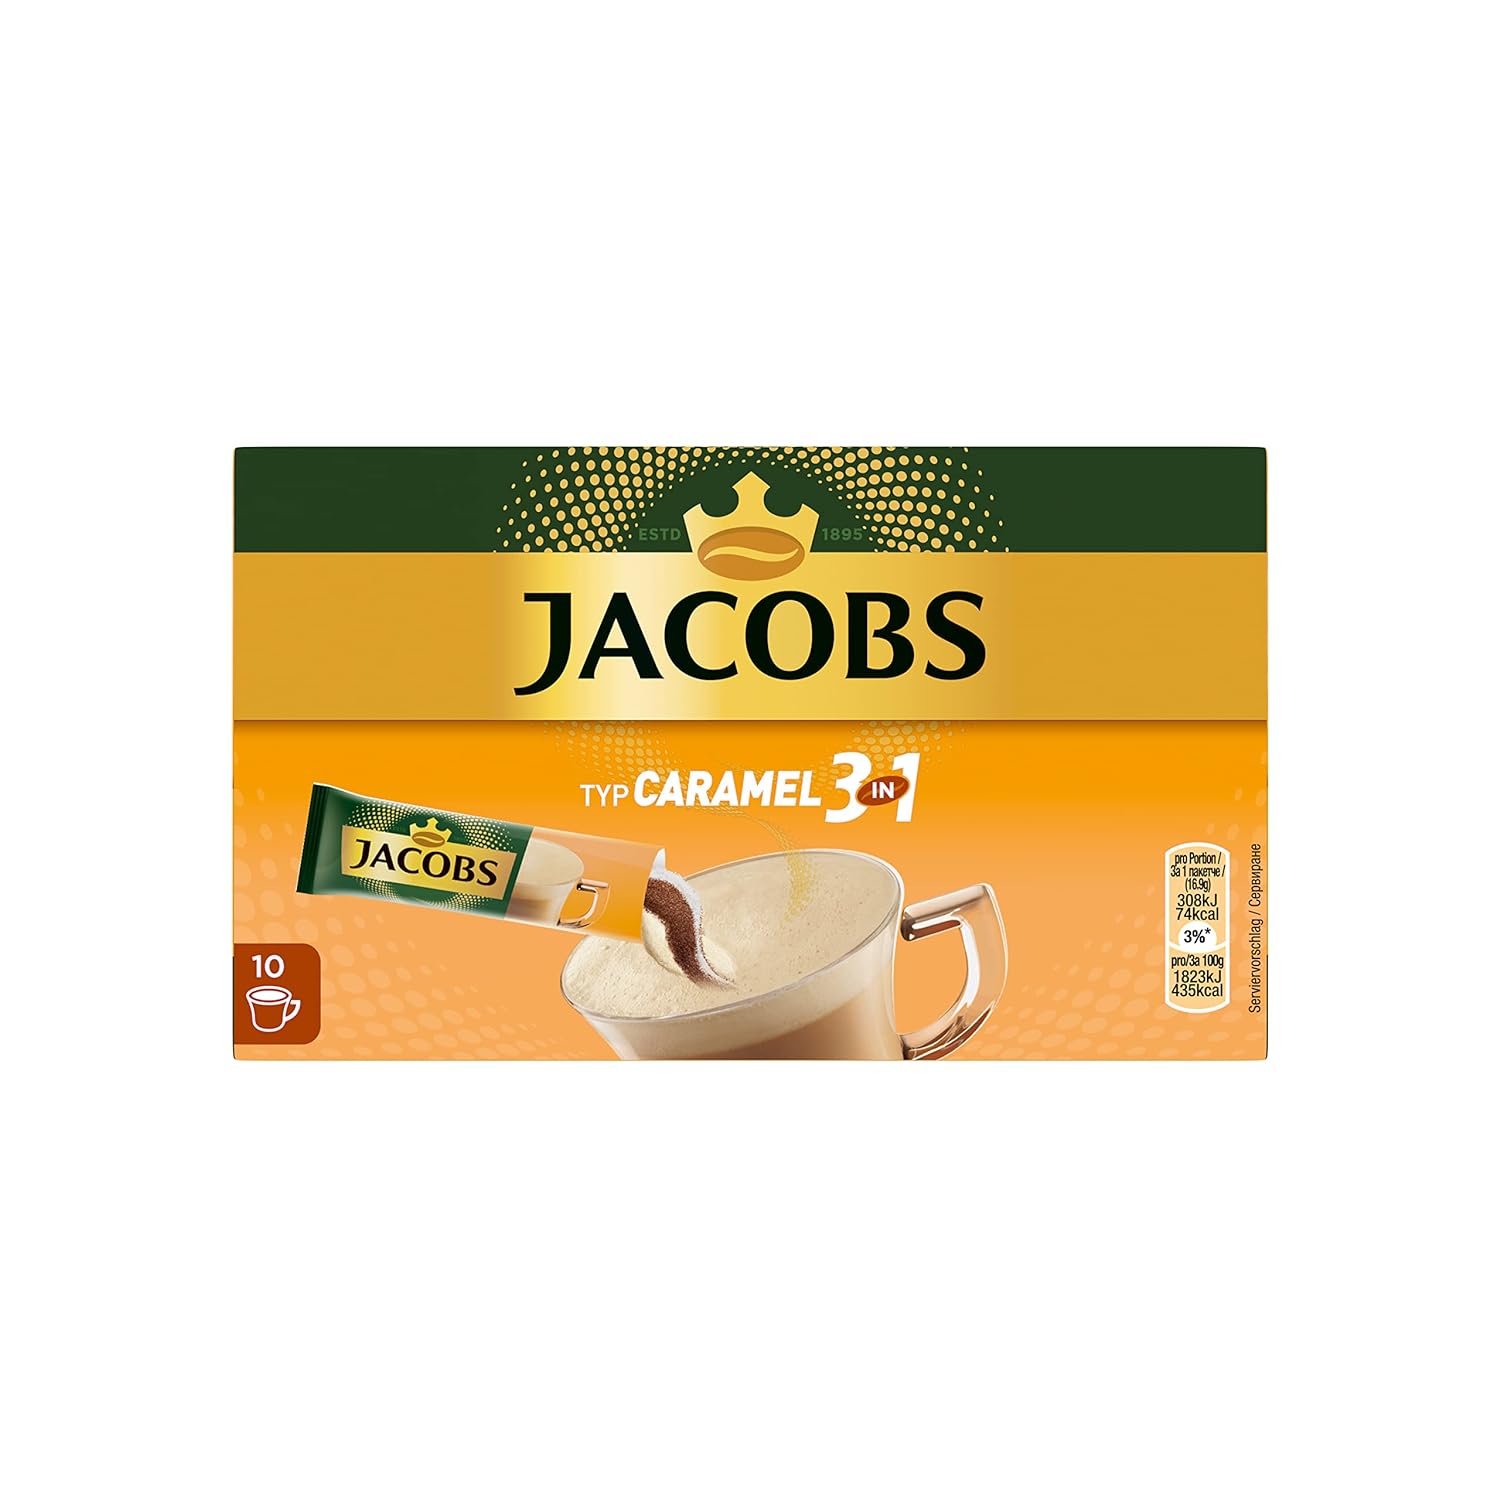 Jacobs coffee specialties 3 in 1 caramel, 10 sticks with instant coffee for 10 drinks | 10 × 16.9g | 10 pieces (1er pack)